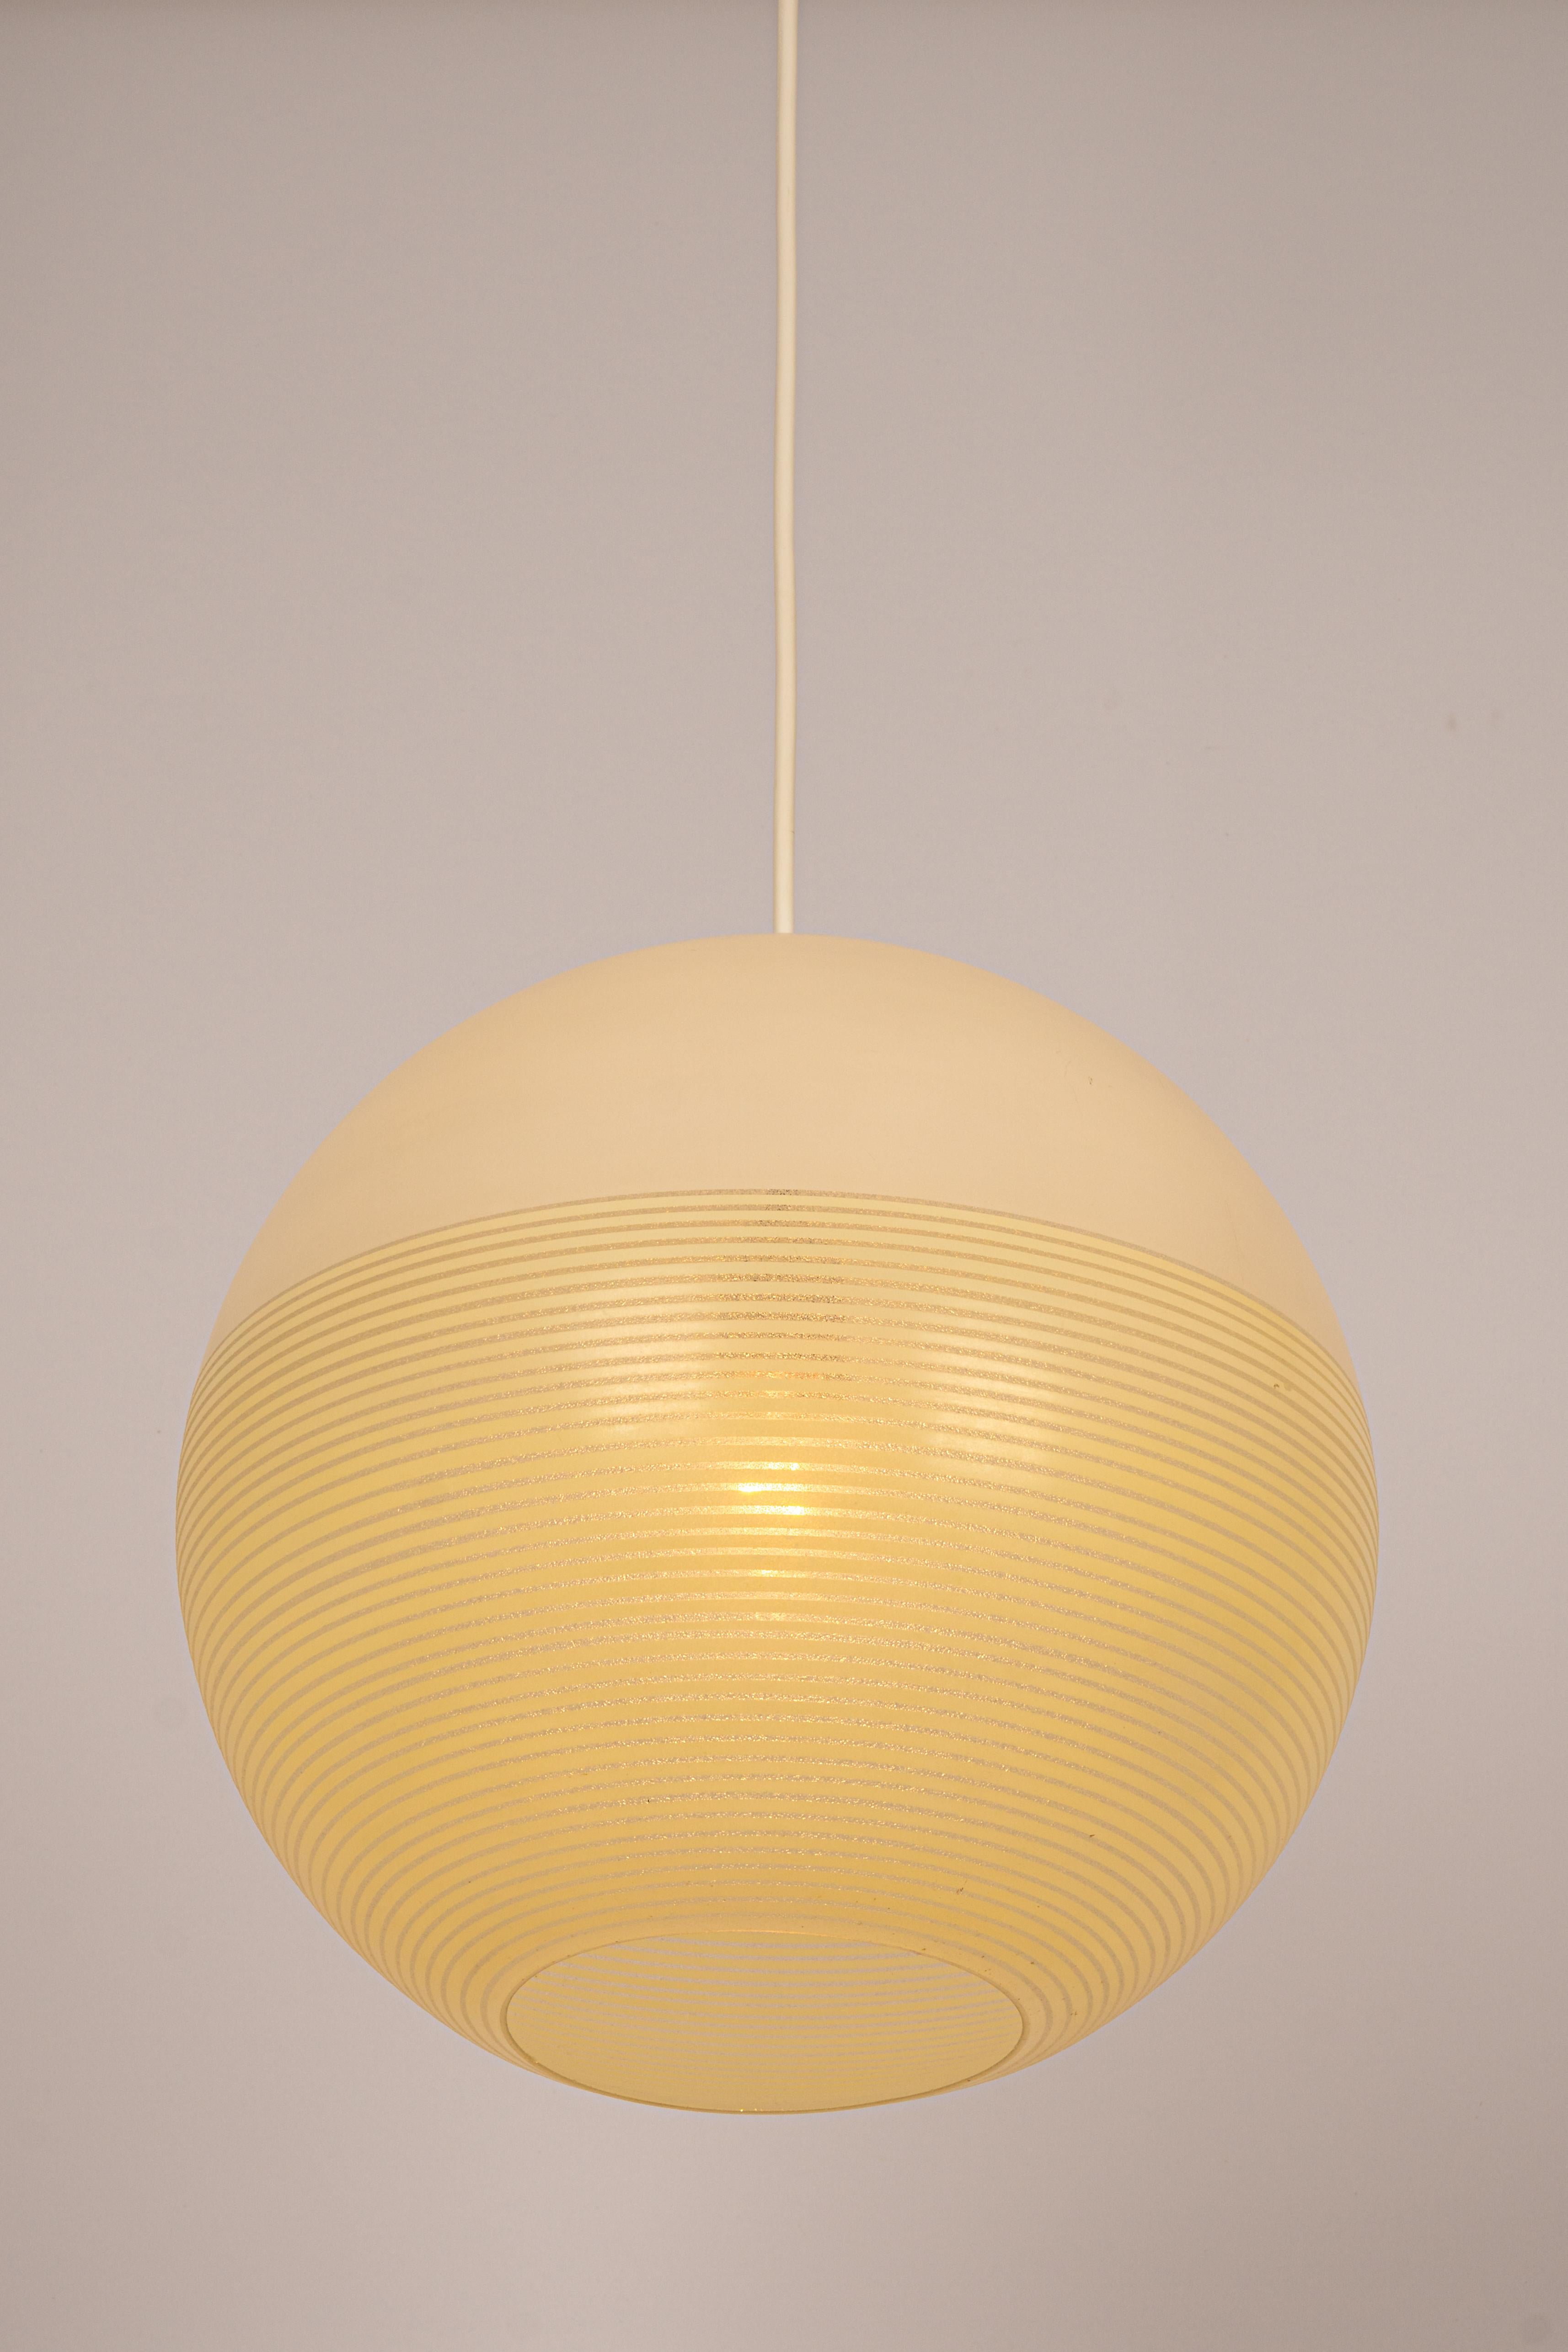 Glass Ball Pendant Light by Doria, Germany, 1960s For Sale 2